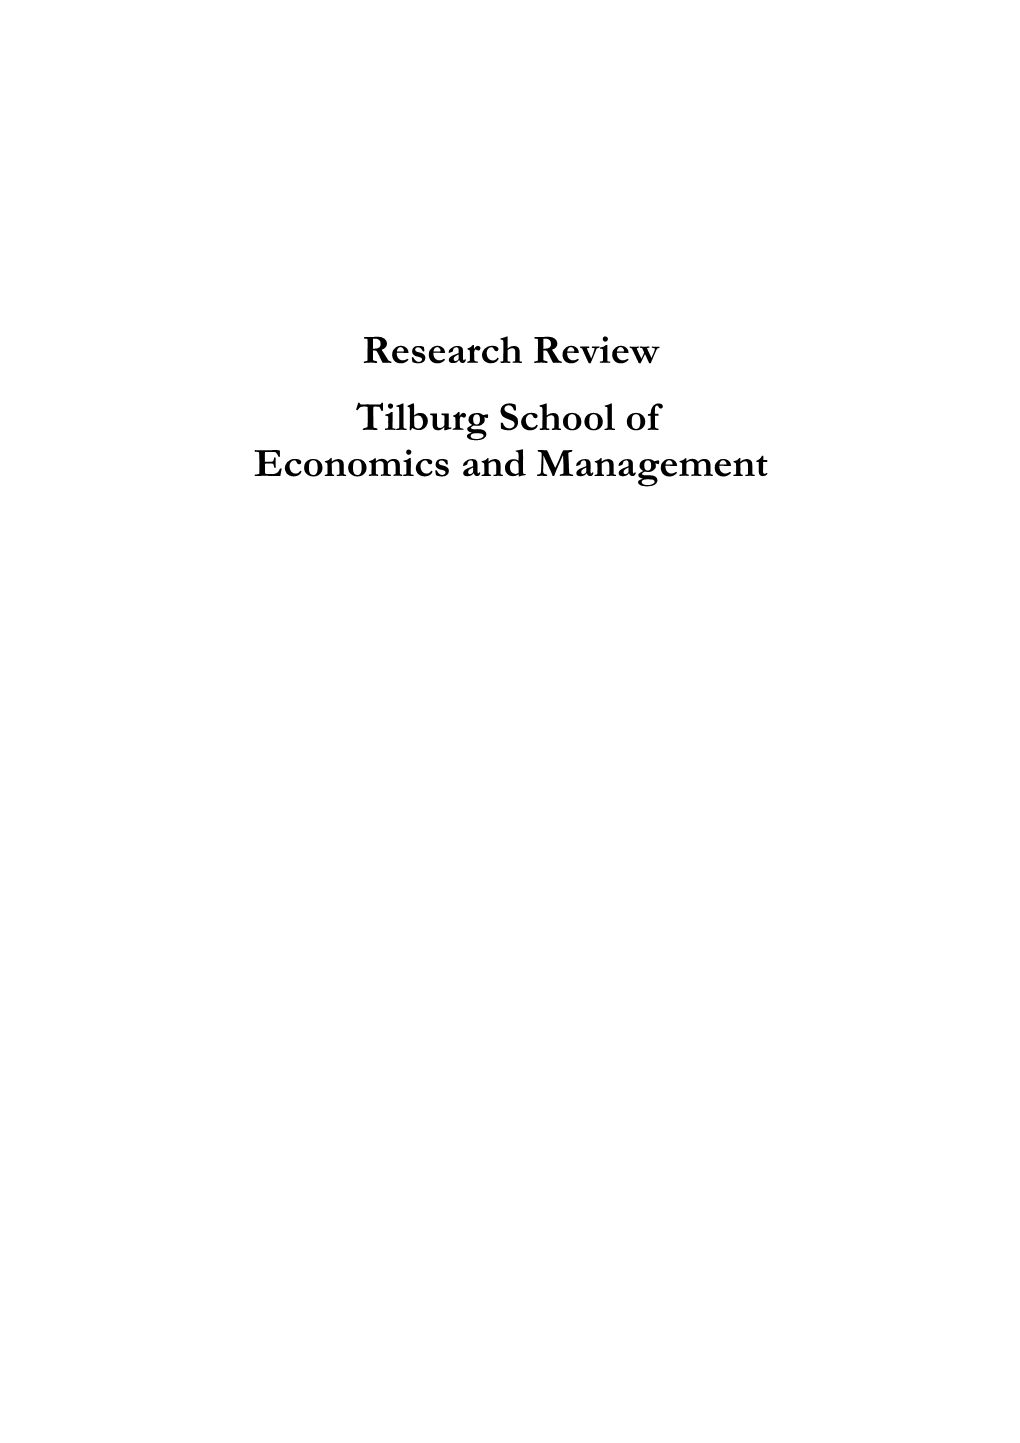 Research Review Tilburg School of Economics and Management